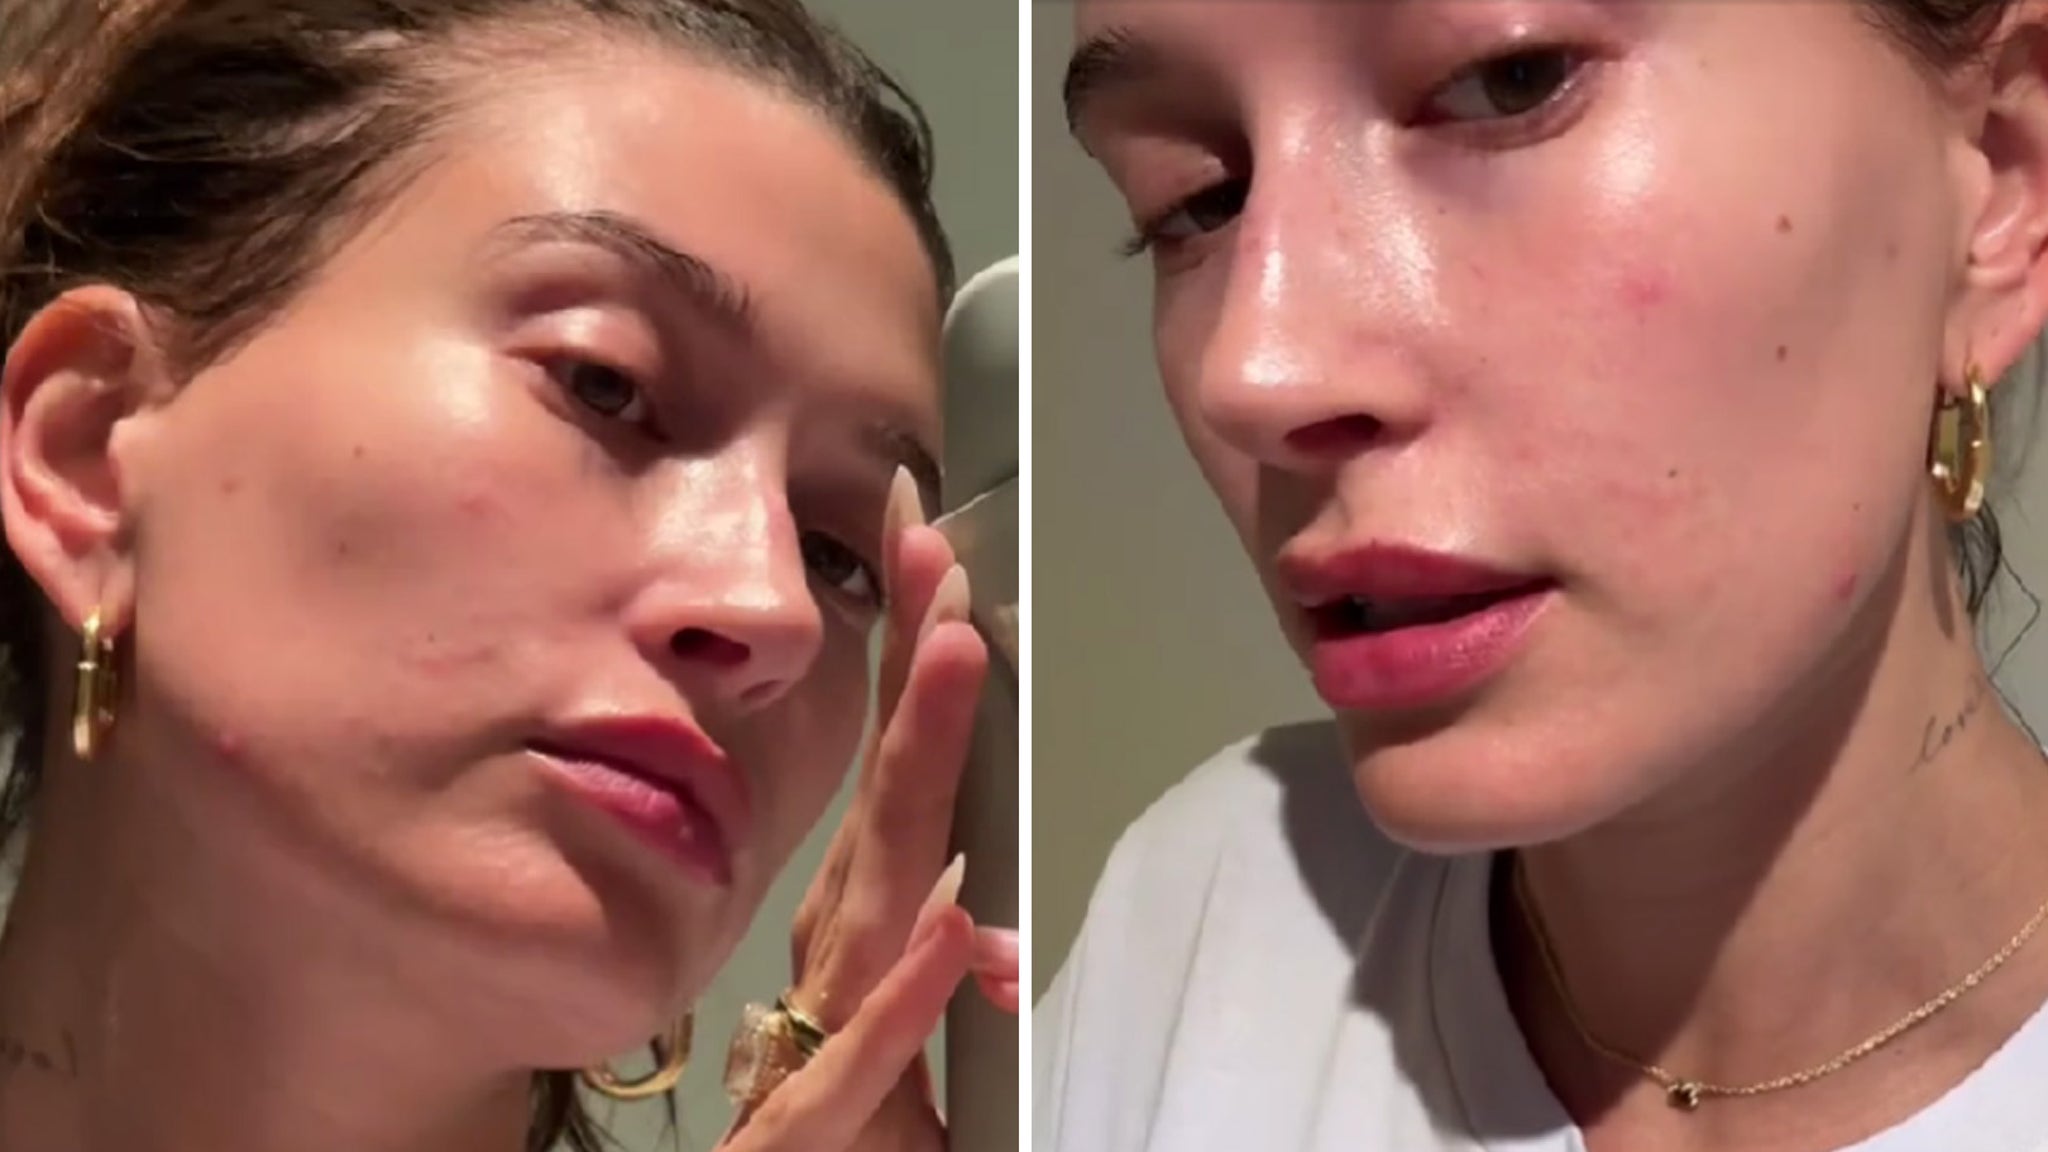 Hailey Bieber Reveals Perioral Dermatitis Flare-Up, Shares How She Treats Skin Condition